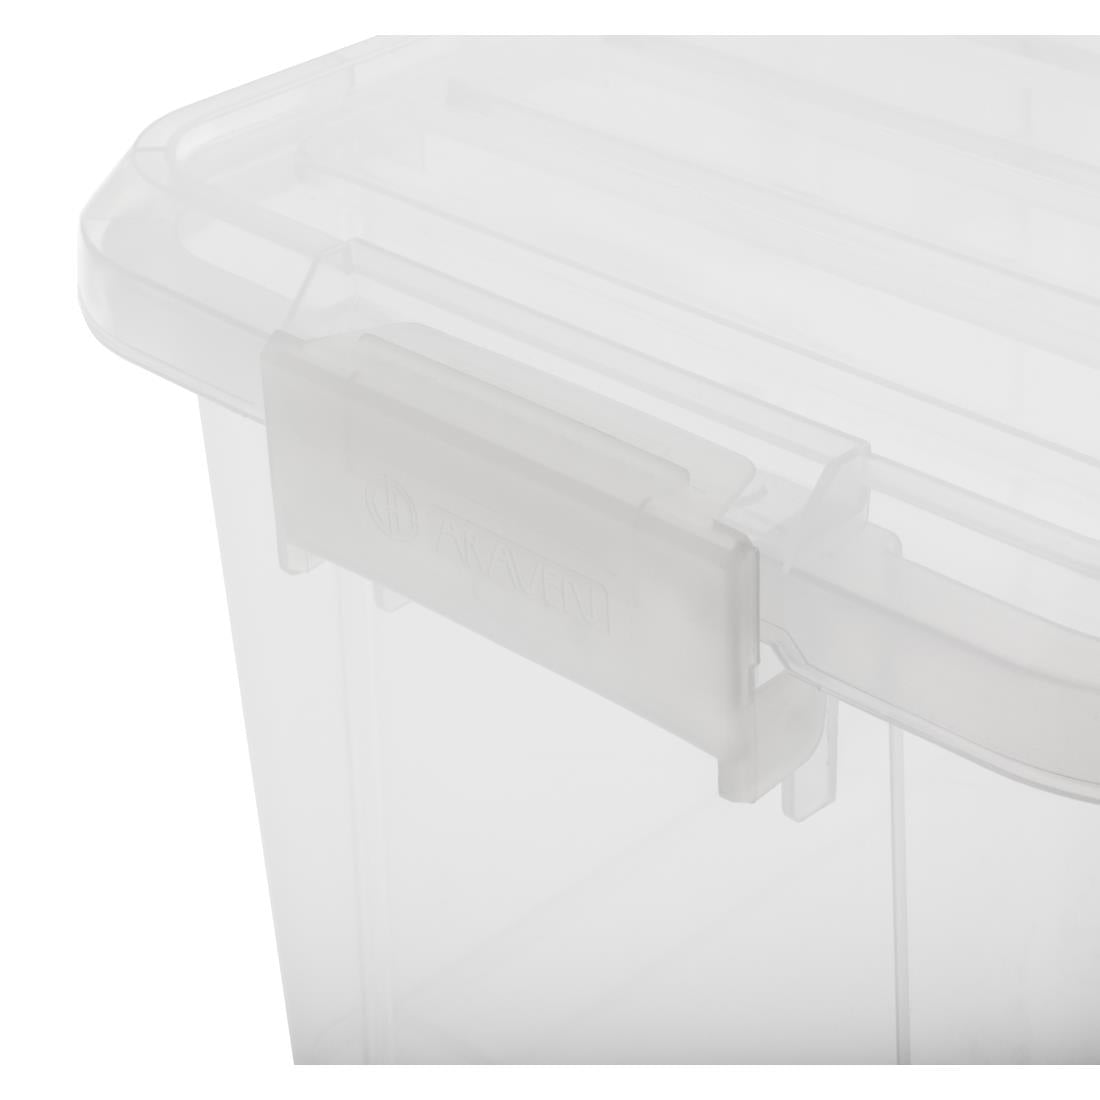 Araven Food Storage Container with Lid 14Ltr JD Catering Equipment Solutions Ltd